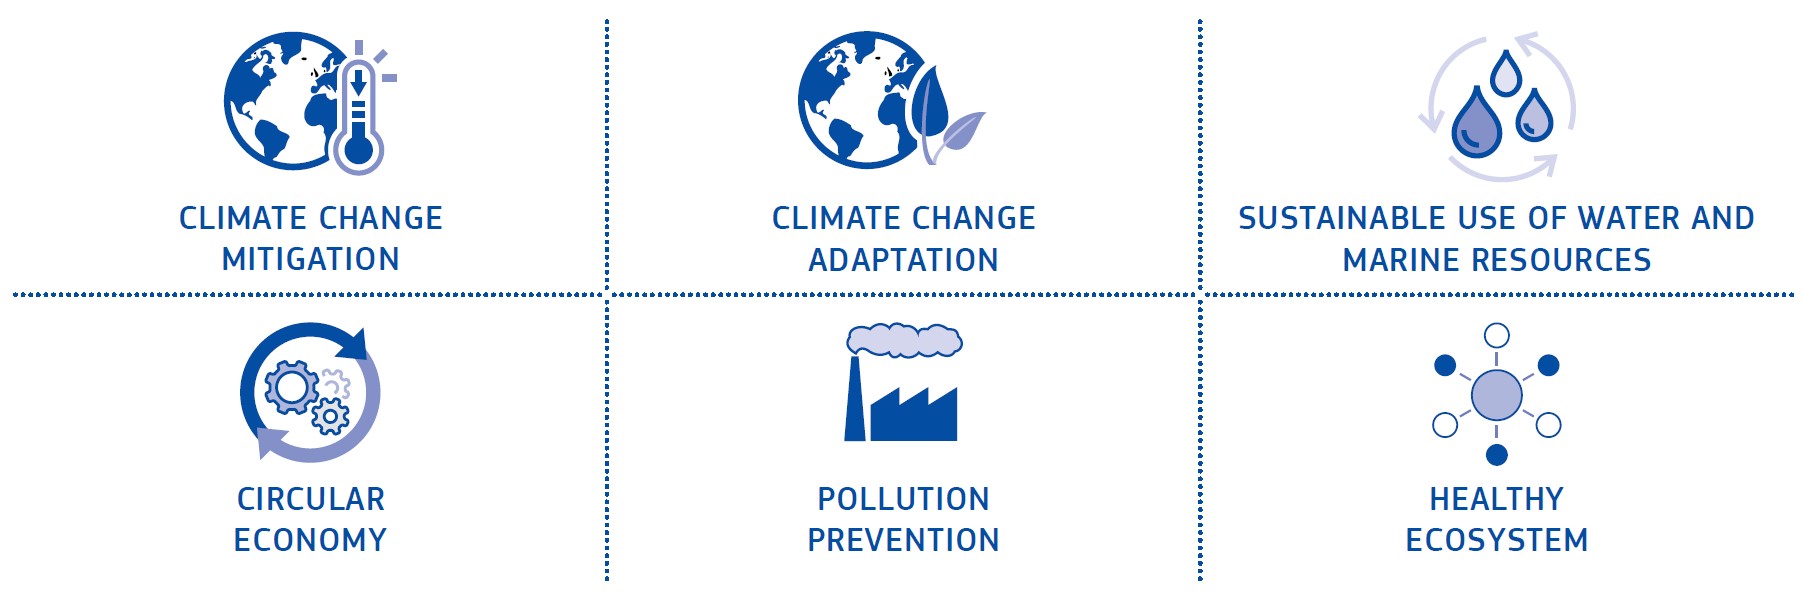 Infographic: Climate Change Mitigation, Climate Change Adaptation, Sustainable Use of Water and Marine Resources, Circular Economy, Pollution Prevention, Healthy Ecosystem